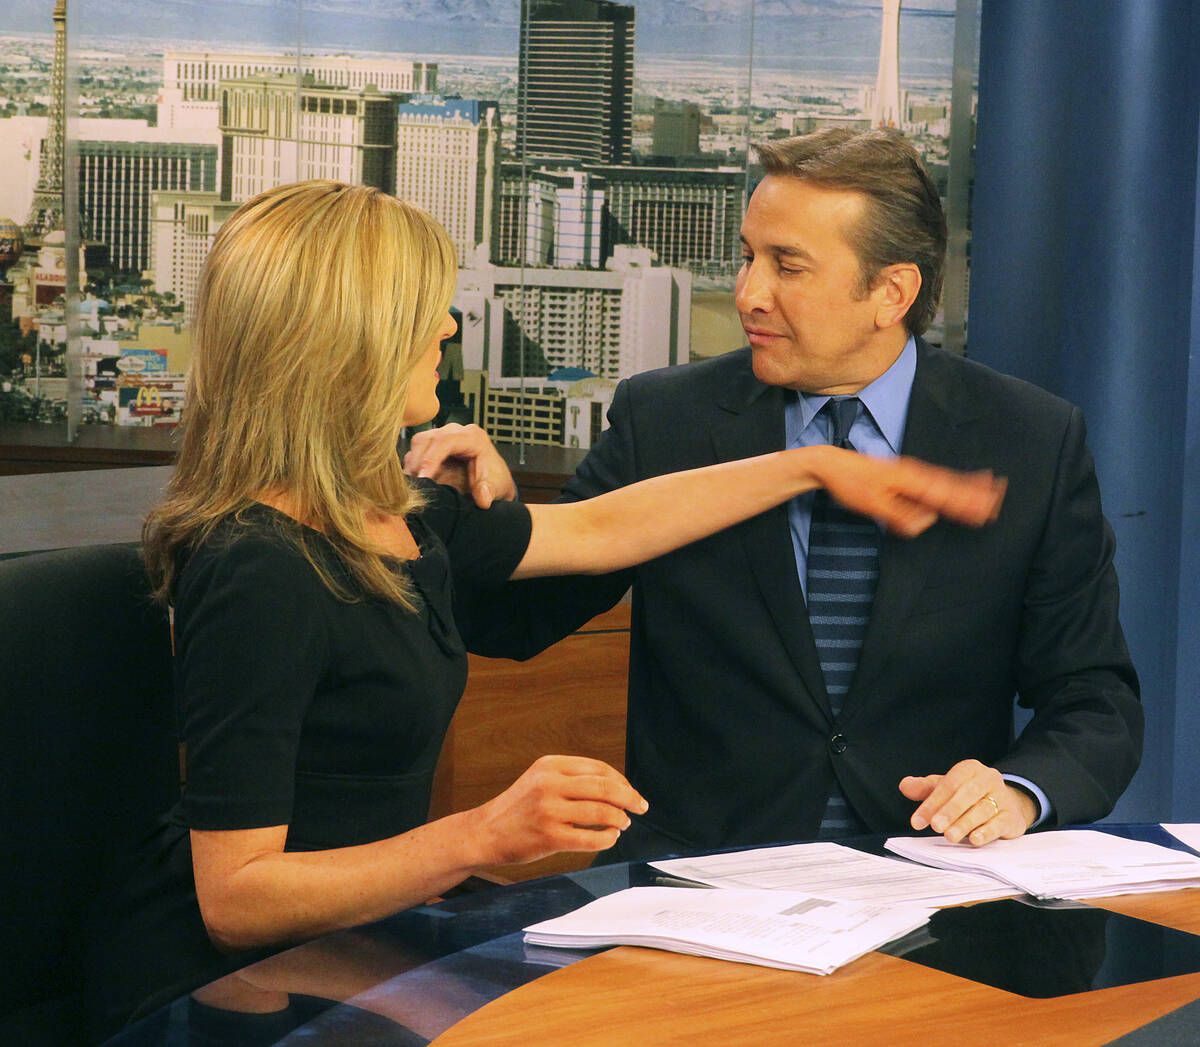 Prior to going on the air at the KSNV-TV studio, husband and wife team Kim and Dana Wagner chec ...